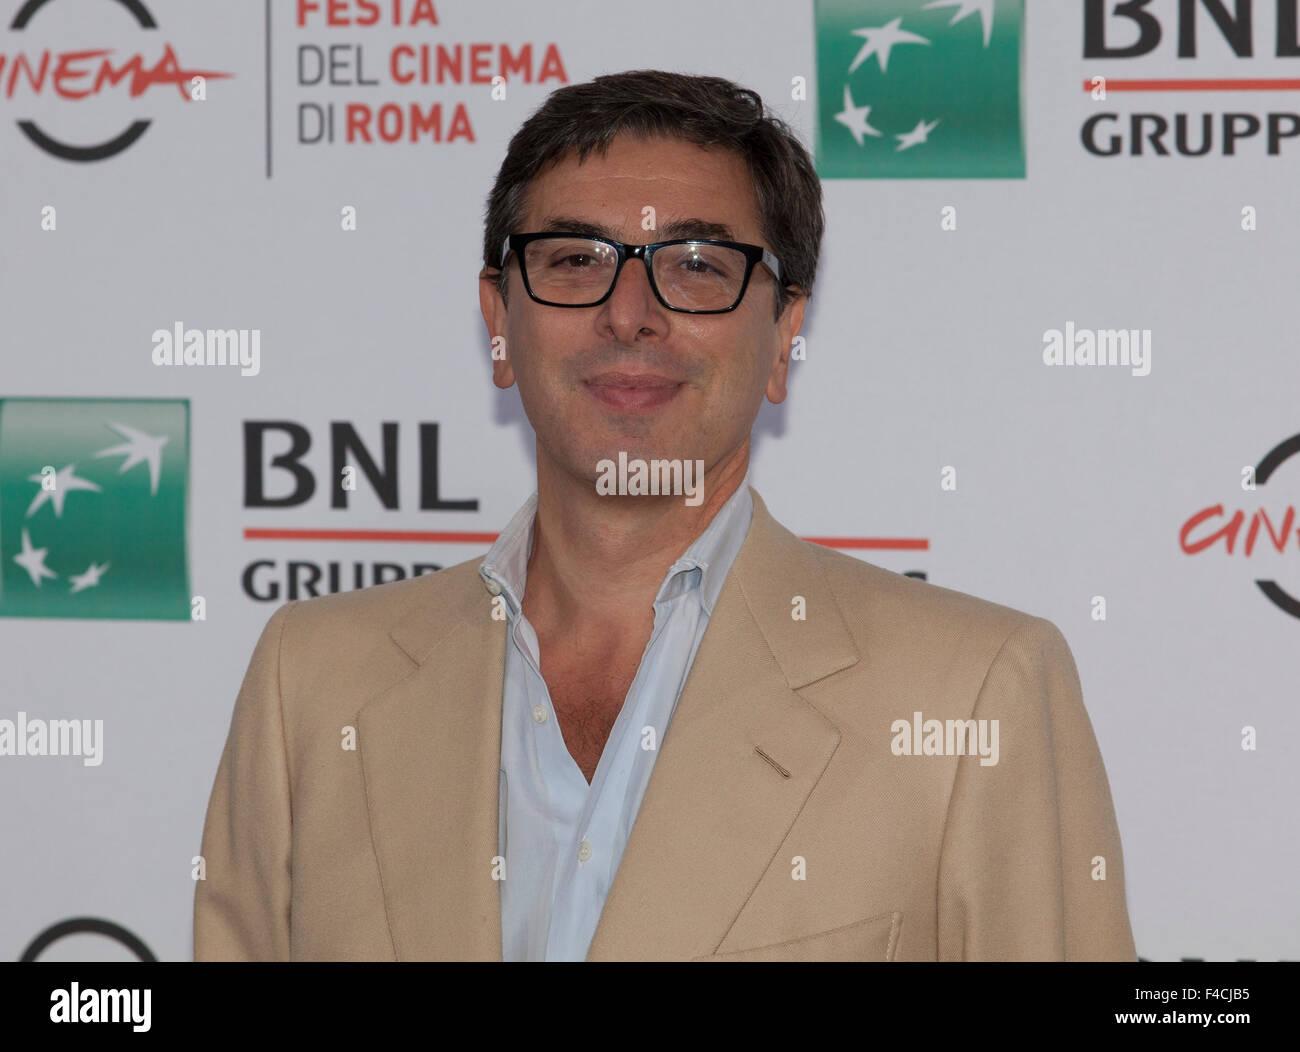 Rome, Italy. 16th October, 2015. Antonio Monda, Artistic Director of the  10th Rome Film Fest at a photo call on the opening day Stock Photo - Alamy